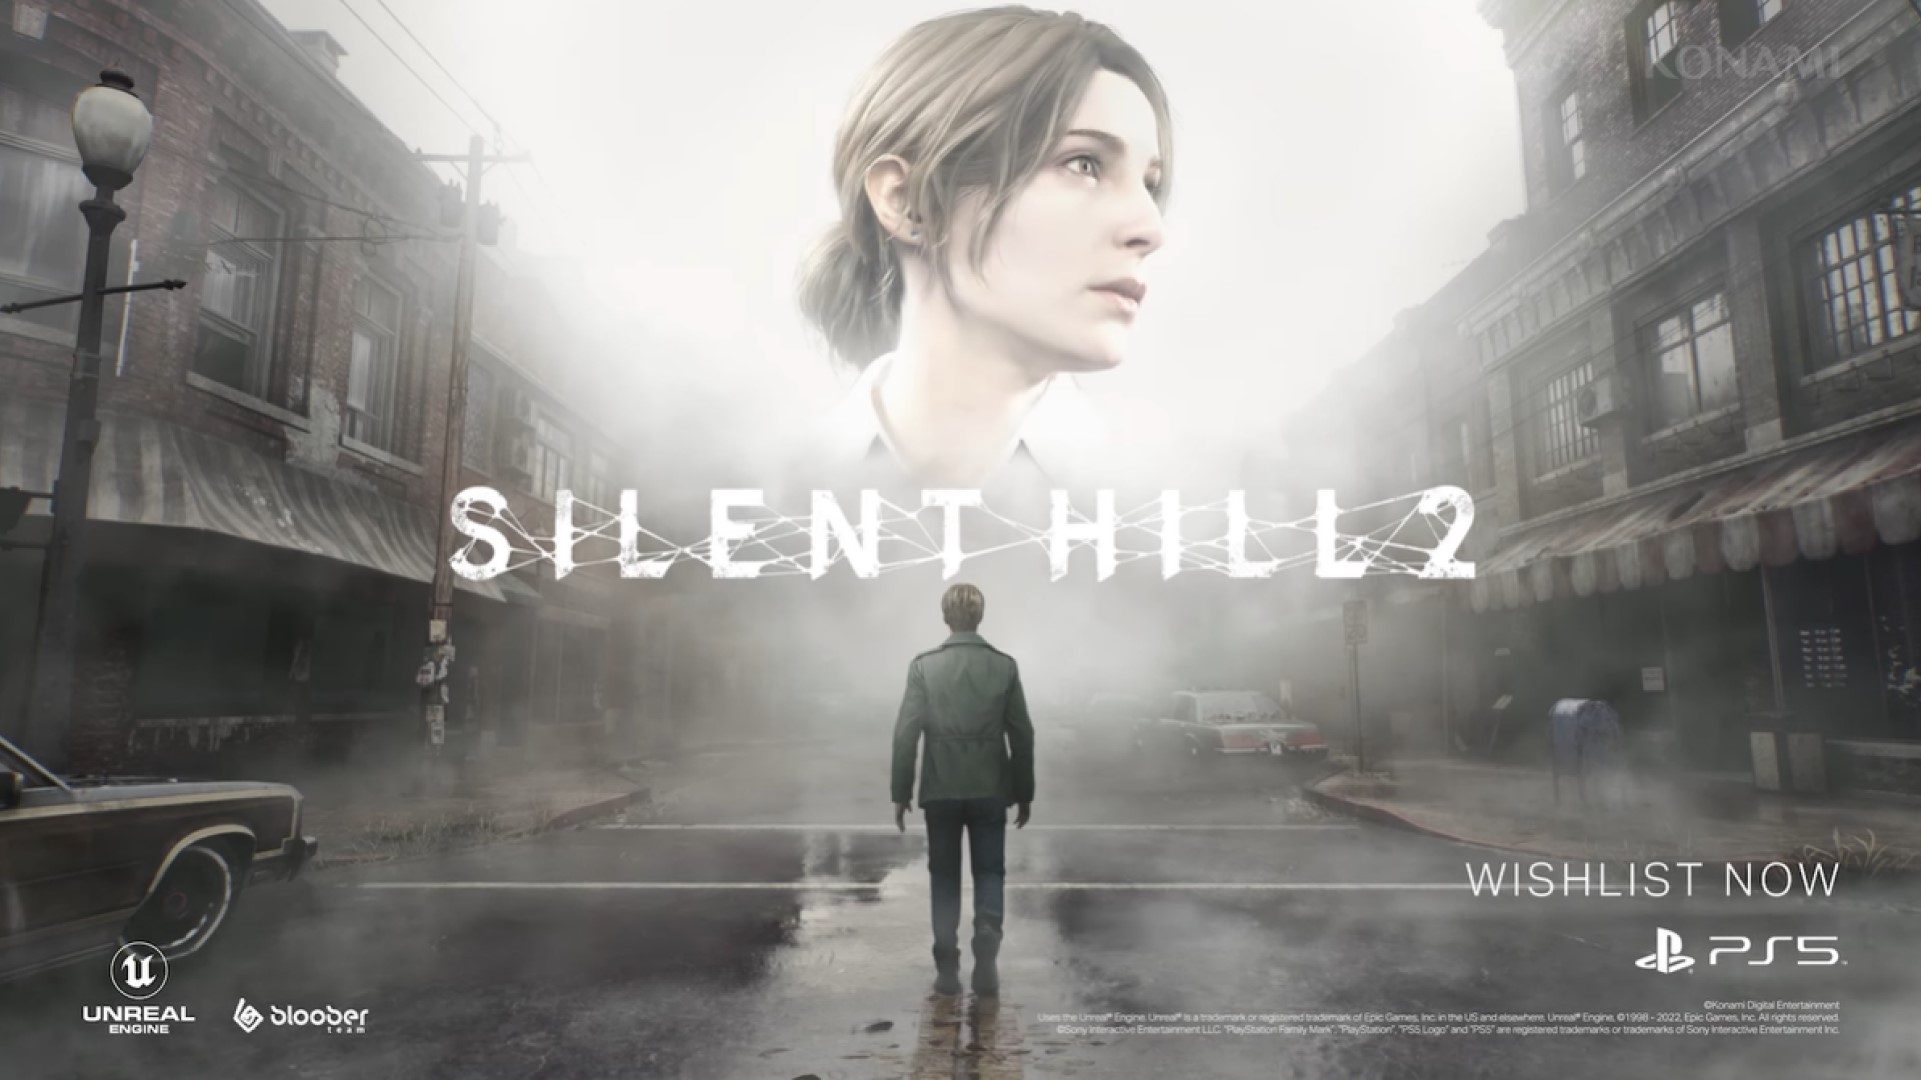 Rumour: Silent Hill 2 remake may be shown during PlayStation event in May